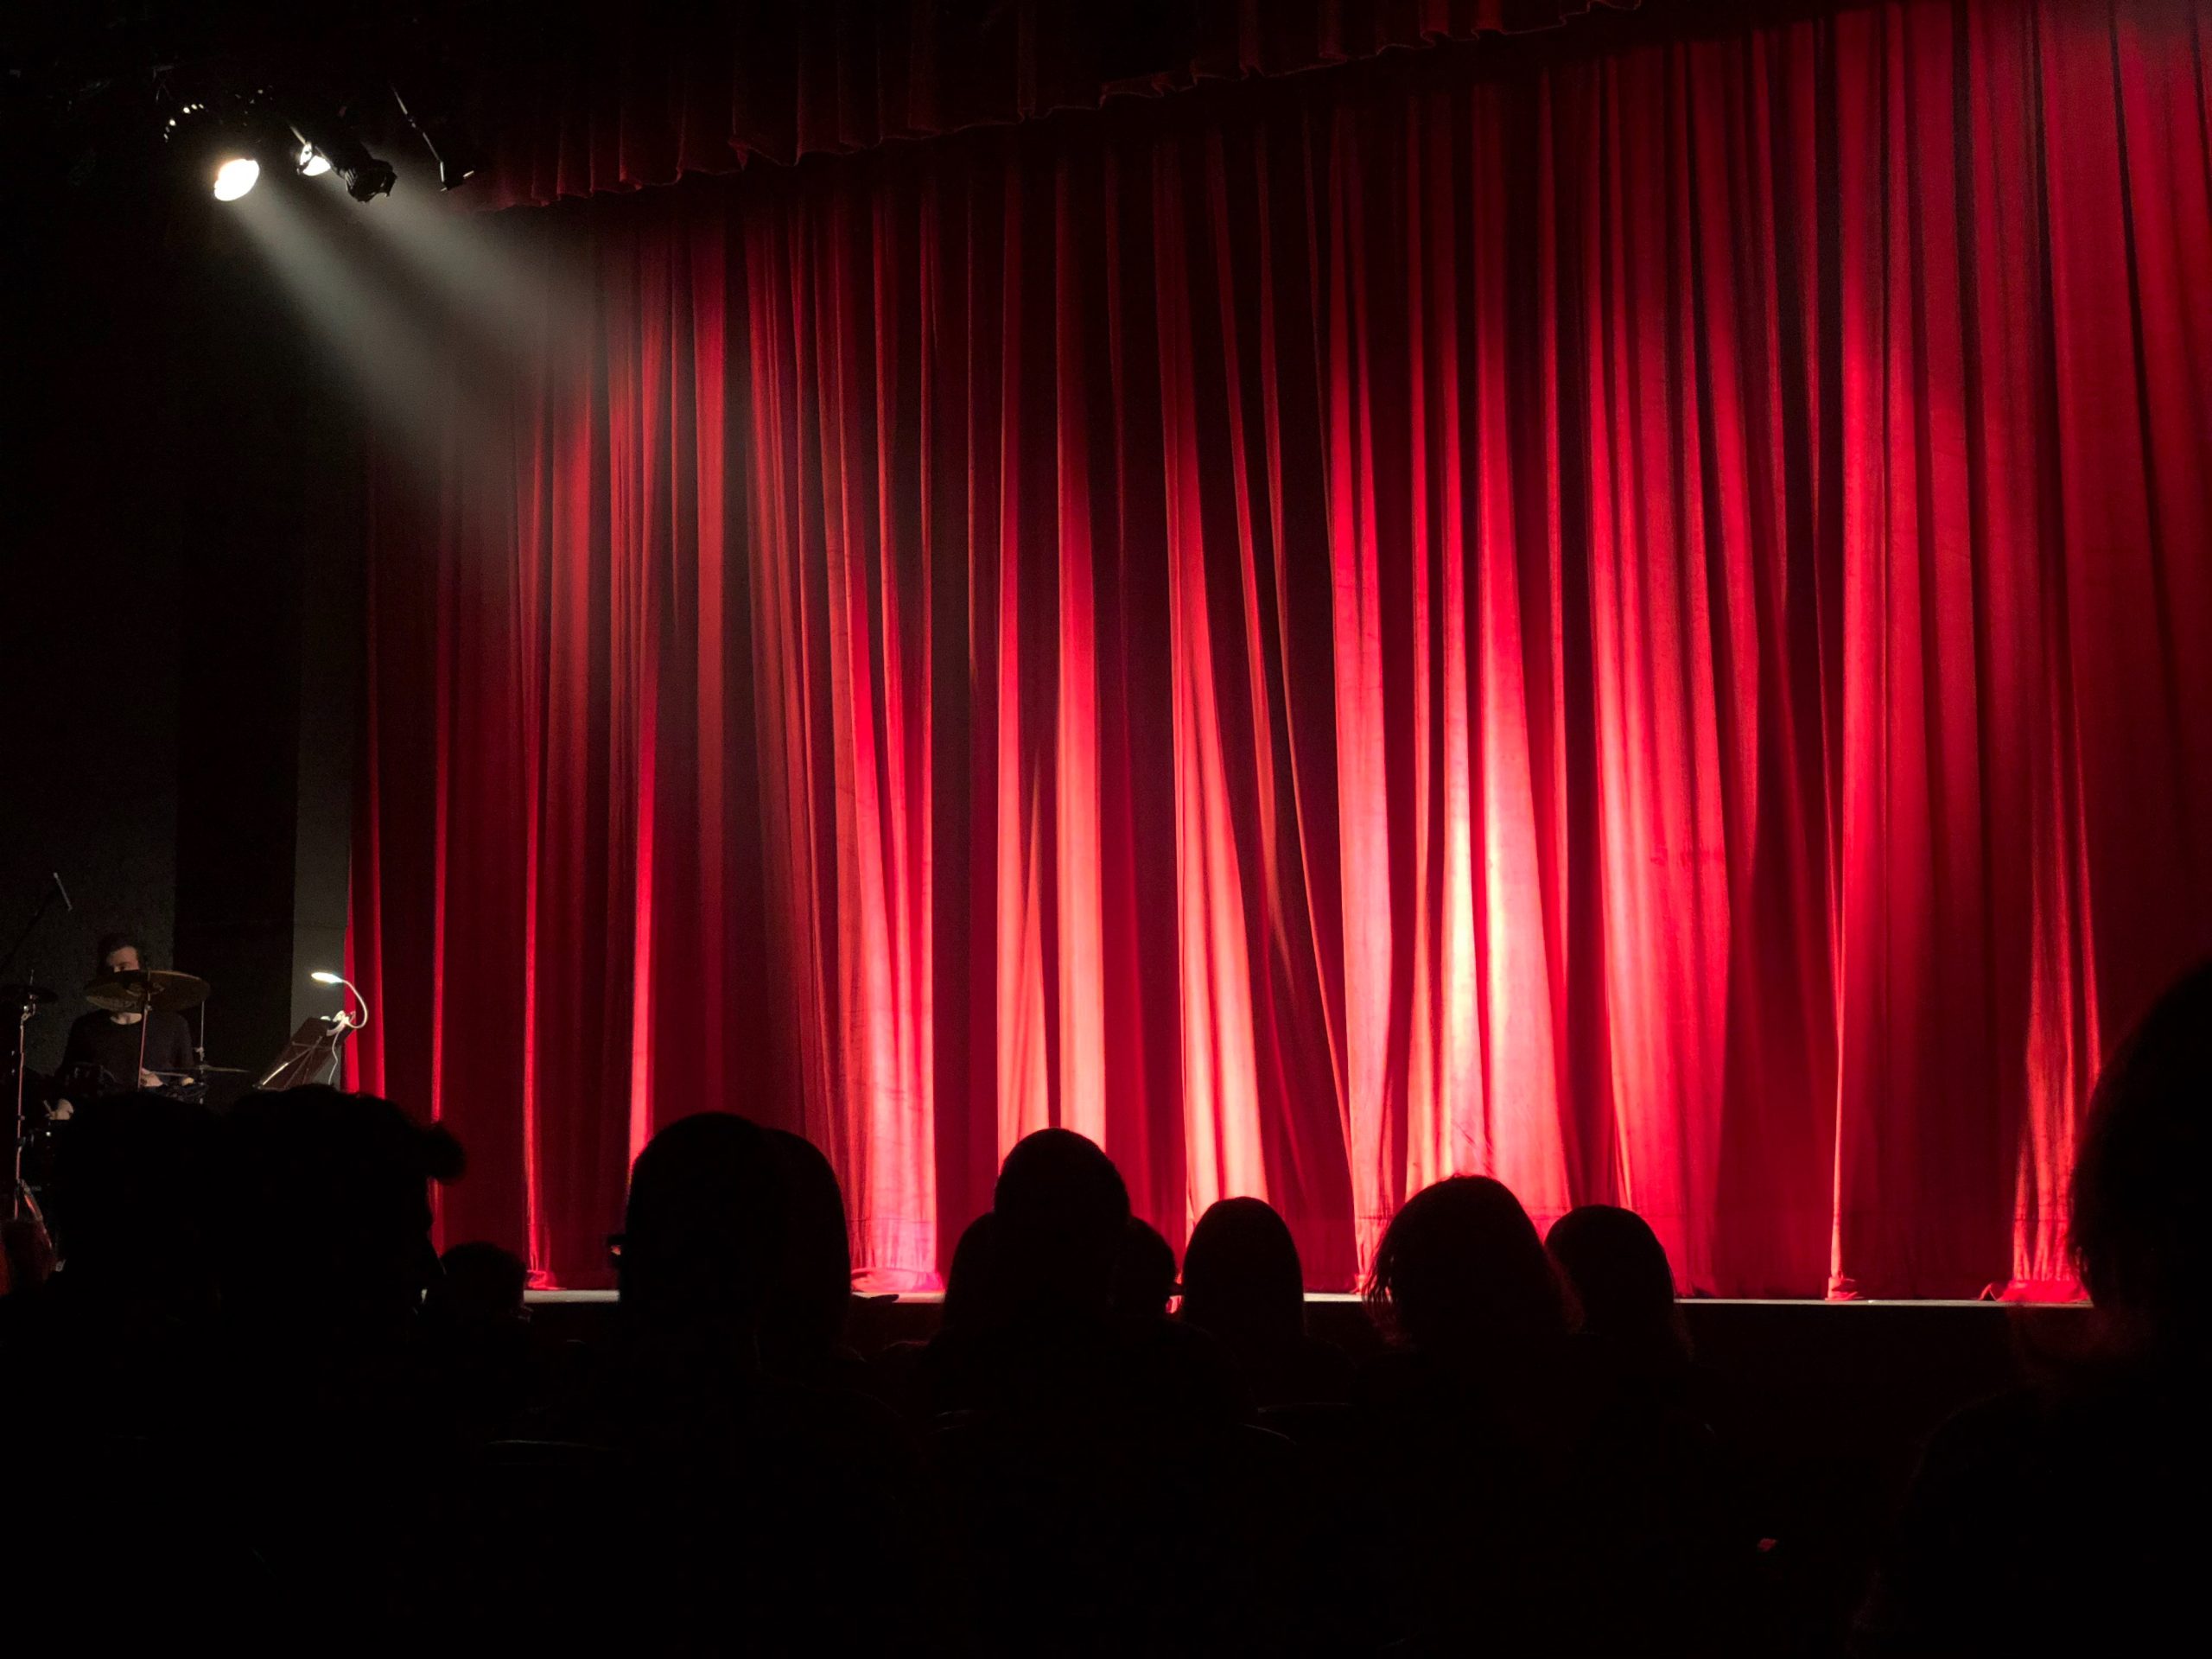 A stage with curtains closed is in front of the audience. in the background a drummer waits for their cue to play.